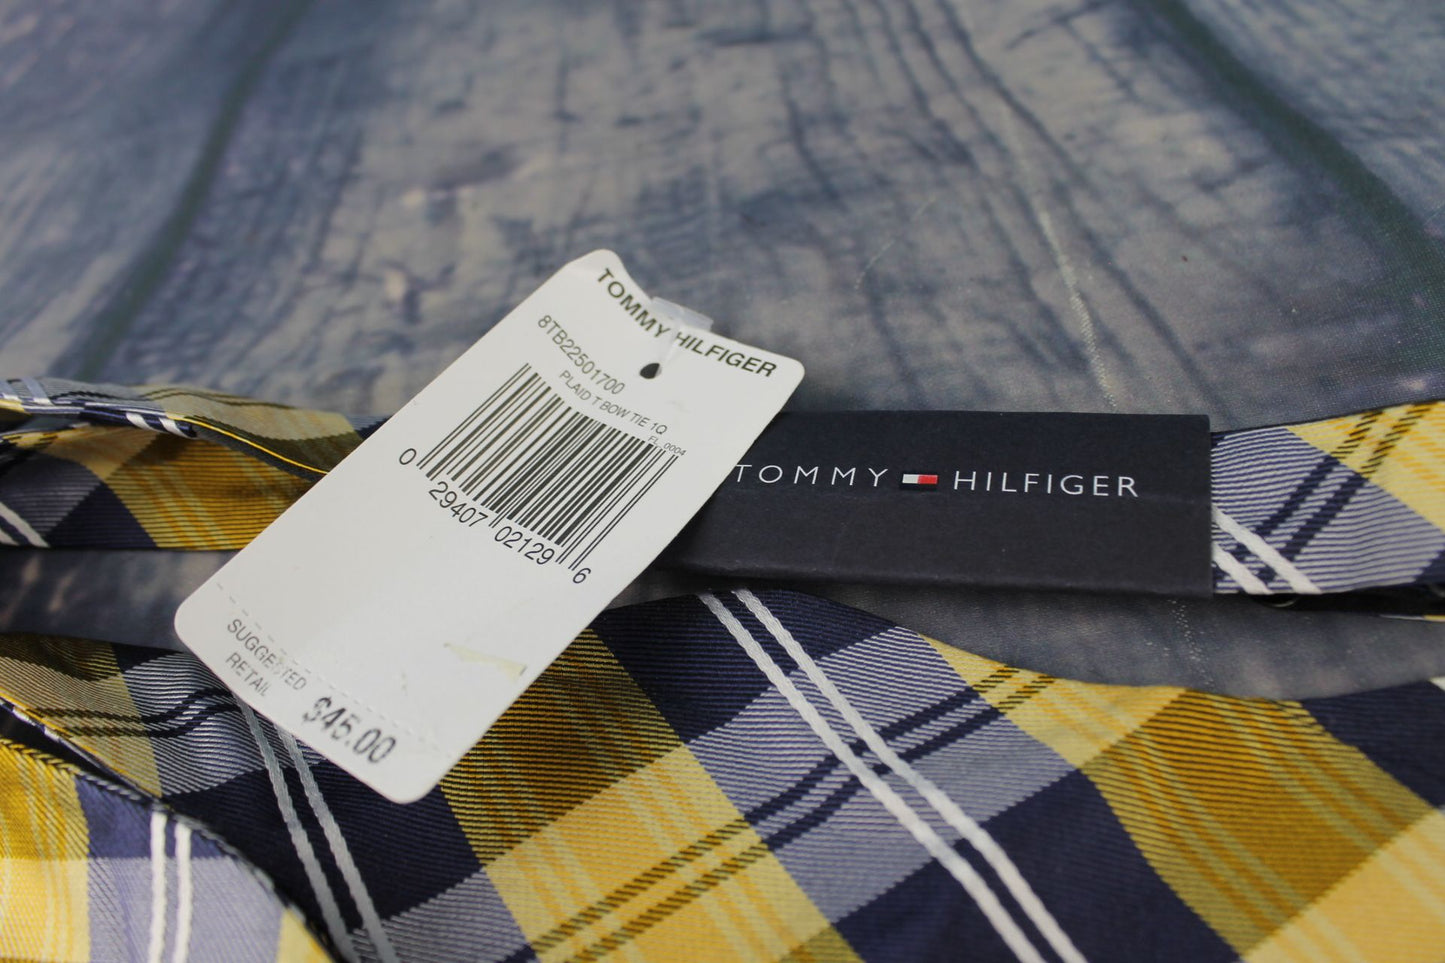 Tommy Hilfiger Navy Gold Plaid Tartan Self Tie Square End Thistle Bow Tie New With Original Tag